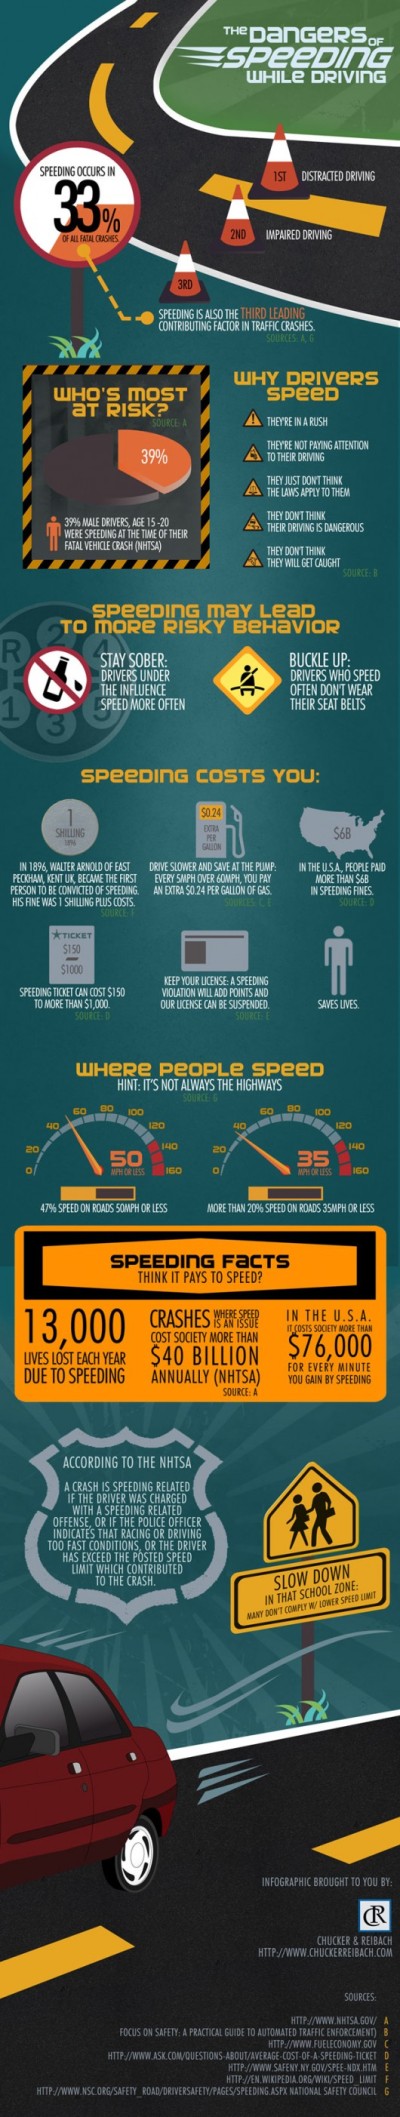 The Dangers of Speeding While Driving infographic